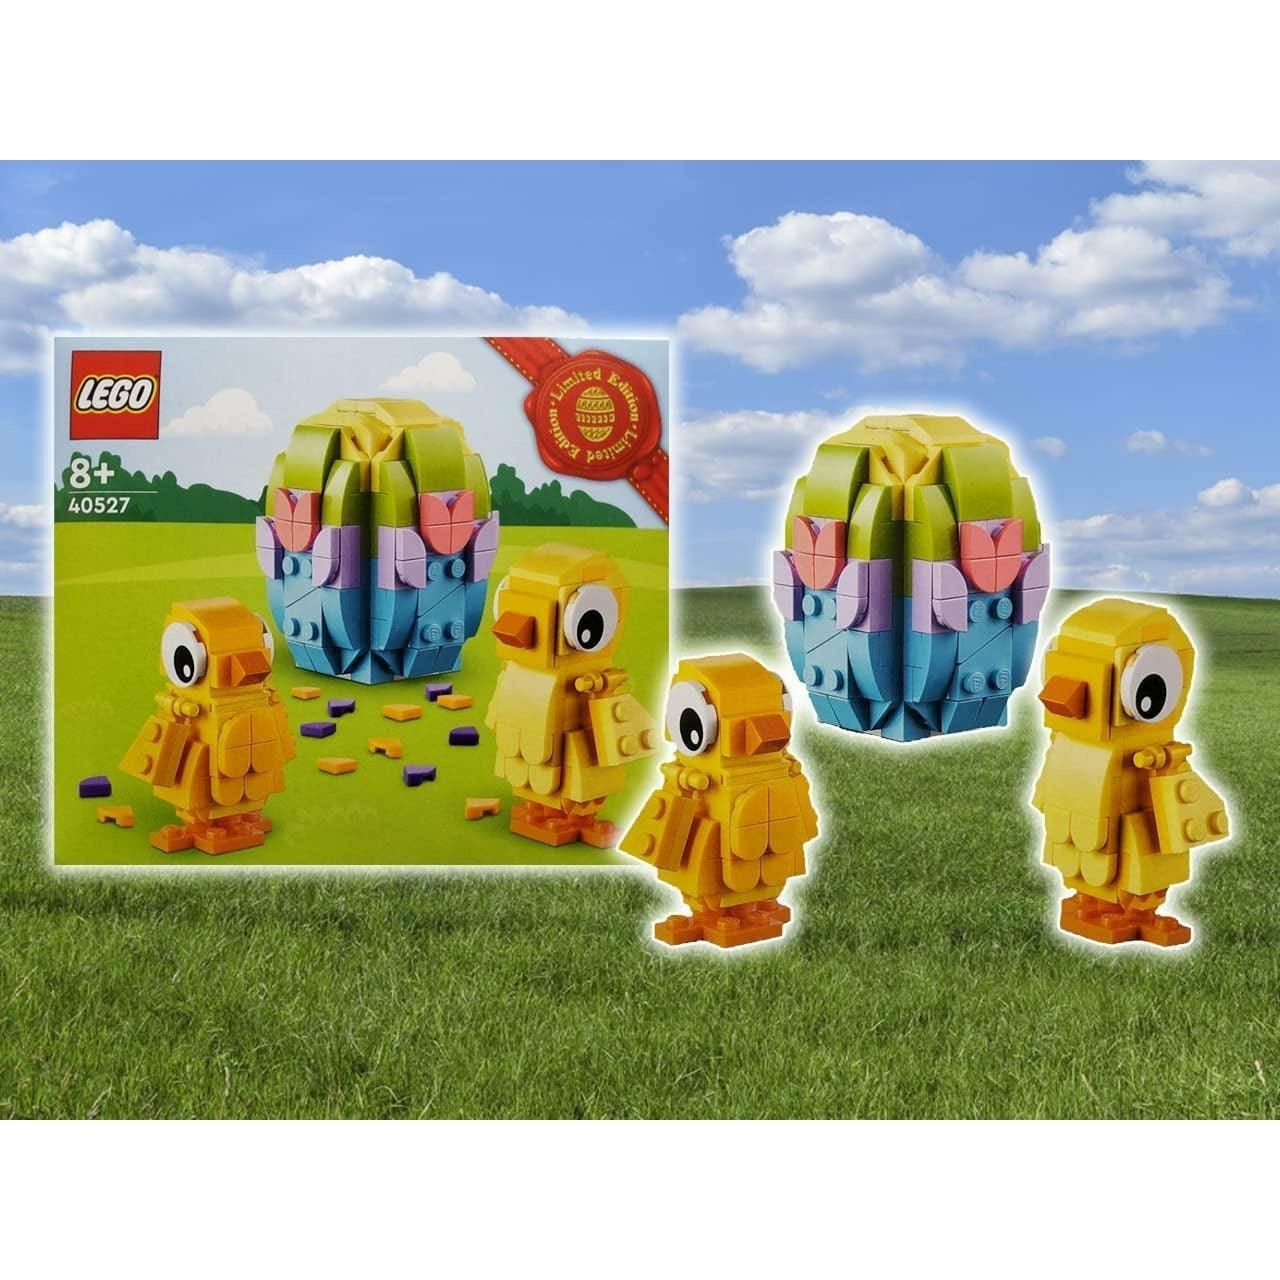 Lego 40527 Easter Chicks 318 Pieces - BumbleToys - 8+ Years, 8-13 Years, Boys, LEGO, OXE, Pre-Order